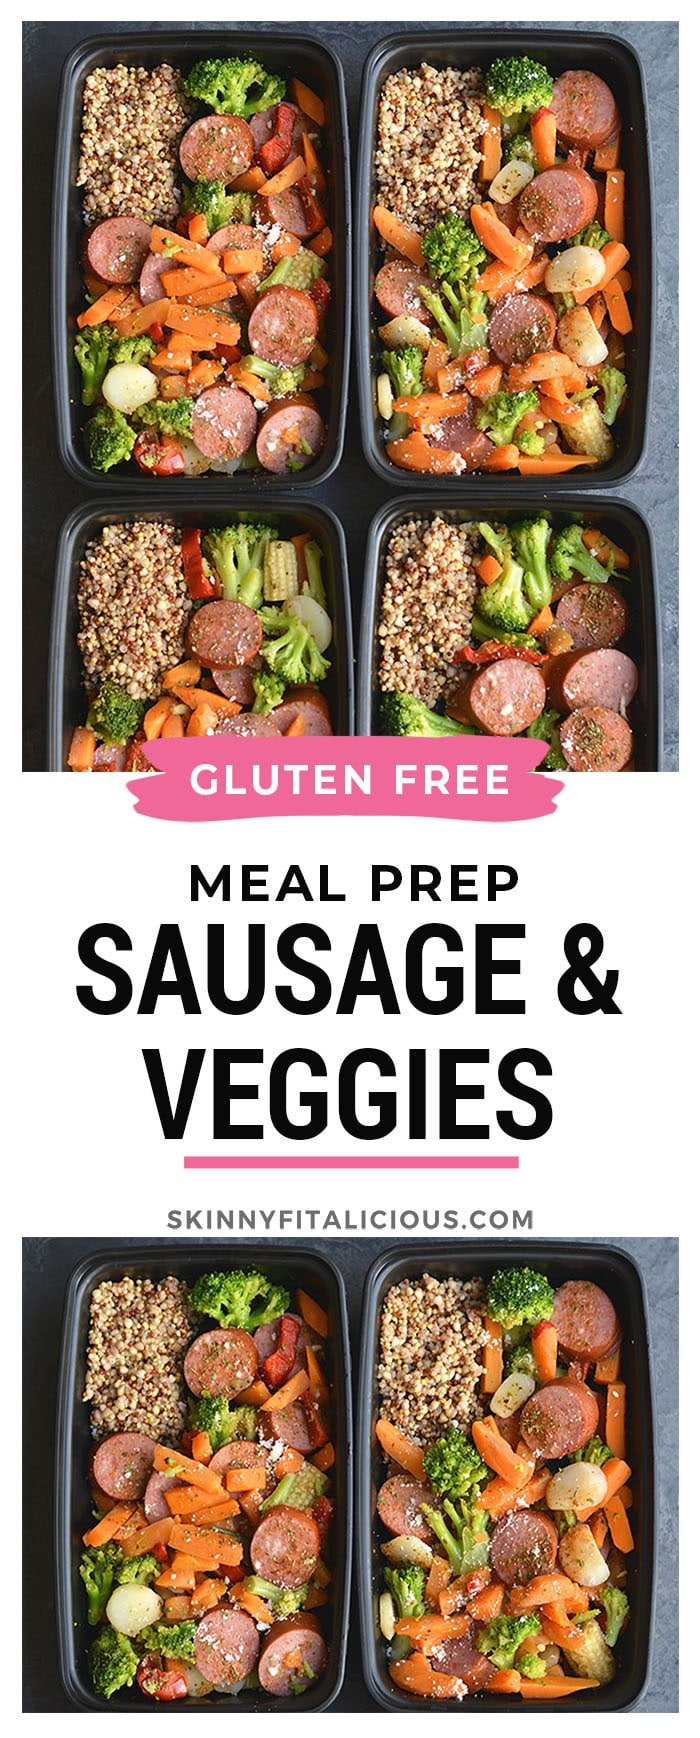 Meal Prep Sausage & Veggies! This protein and veggie packed meal is made EASY on a sheet pan and divided into meal prep containers for any meal. Eat it for breakfast, lunch or dinner! Pair with a side quinoa or cauliflower rice for Paleo. Gluten Free + Low Calorie